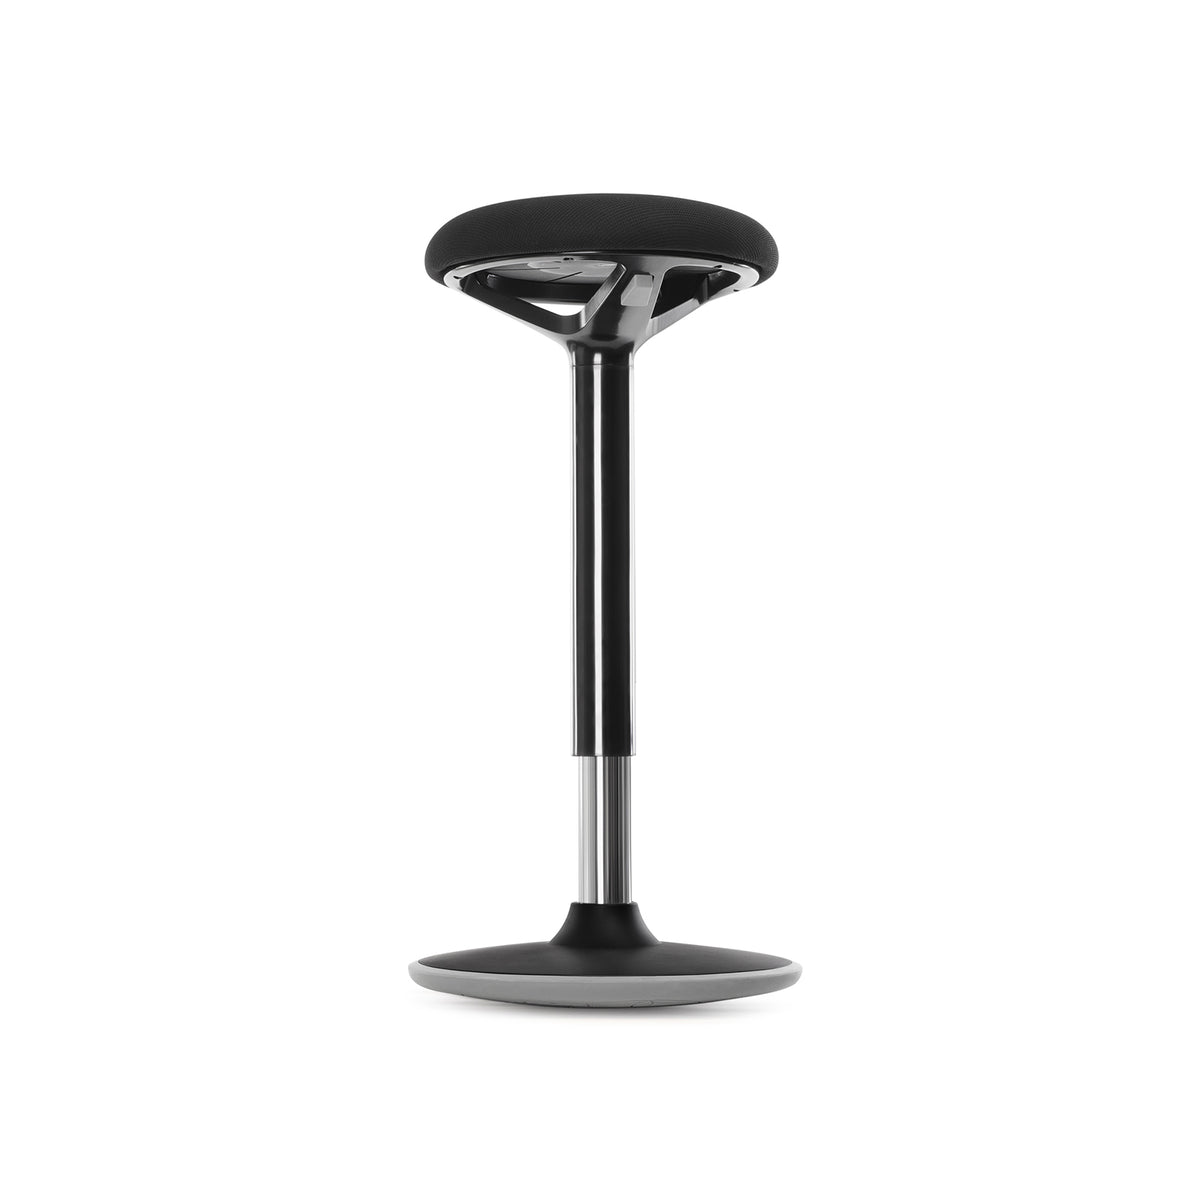 Wobble Stool Standing Desk Balance Office Stool for Active Sitting Black  Adjustable Height 23 33 Sit Stand Up Perching Chair Uncaged Ergonomics -  Office Depot